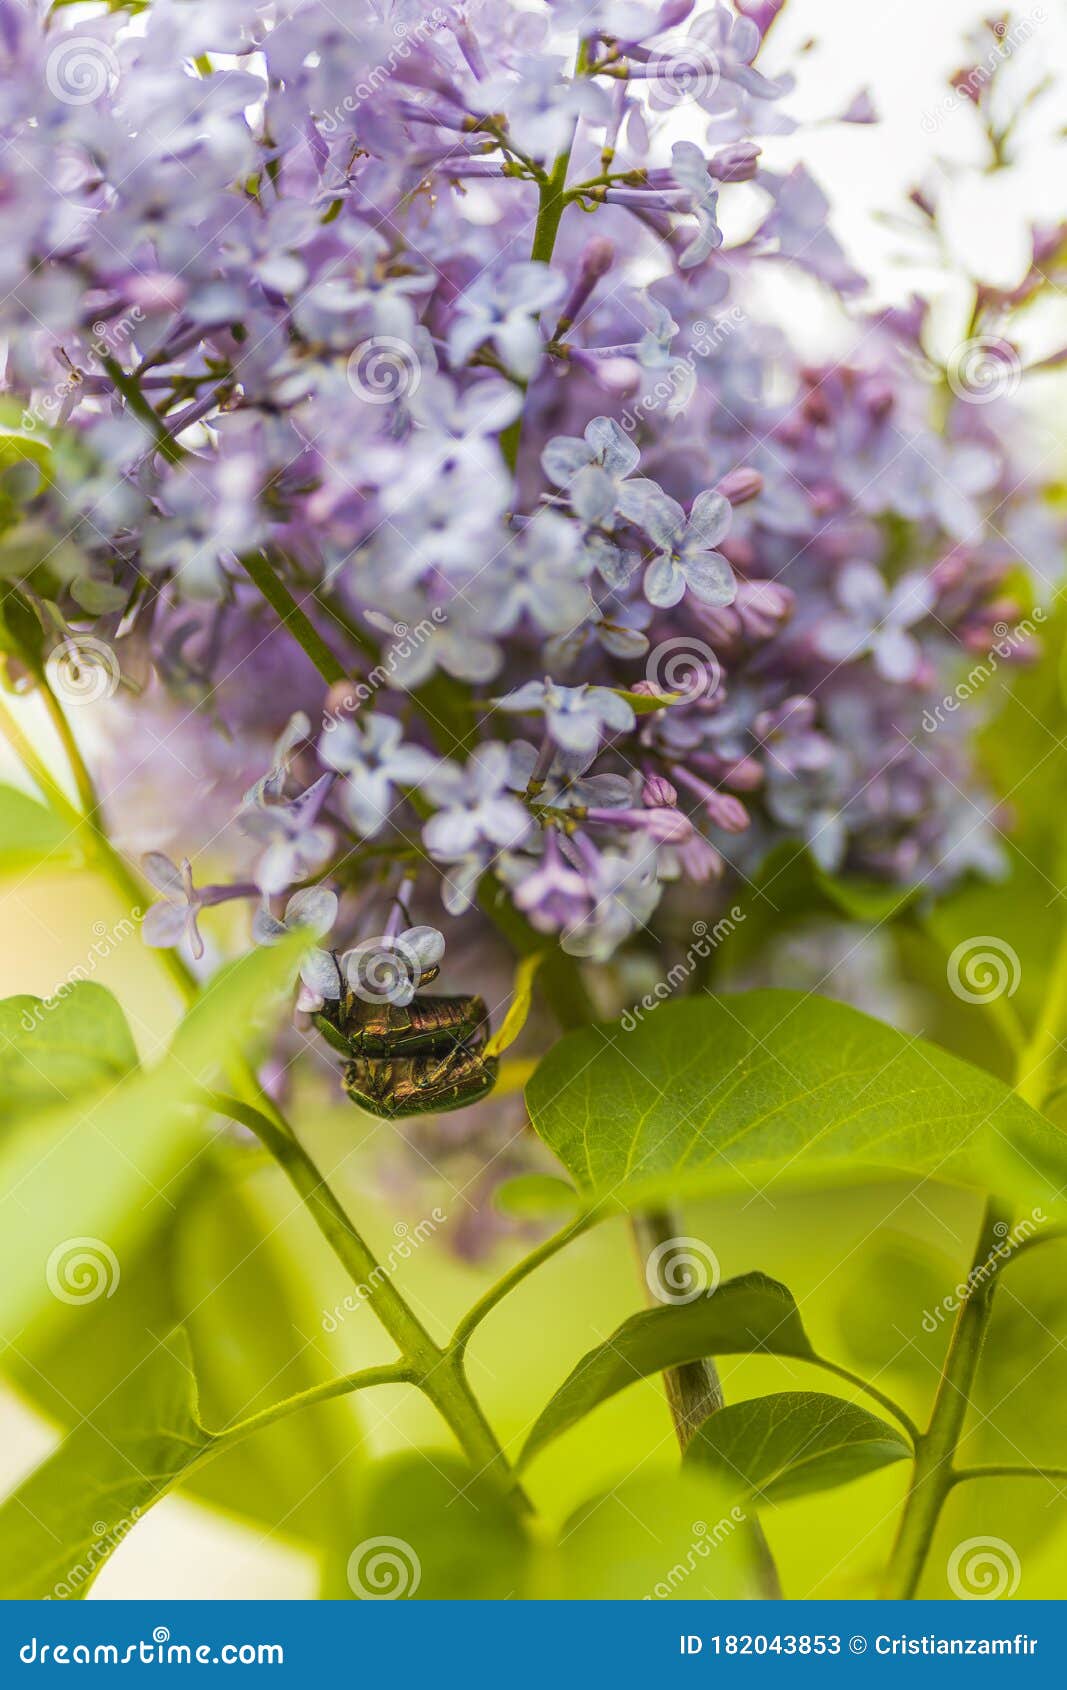 Syringa Vulgaris is a Species of Flowering Plant in the Olive ...